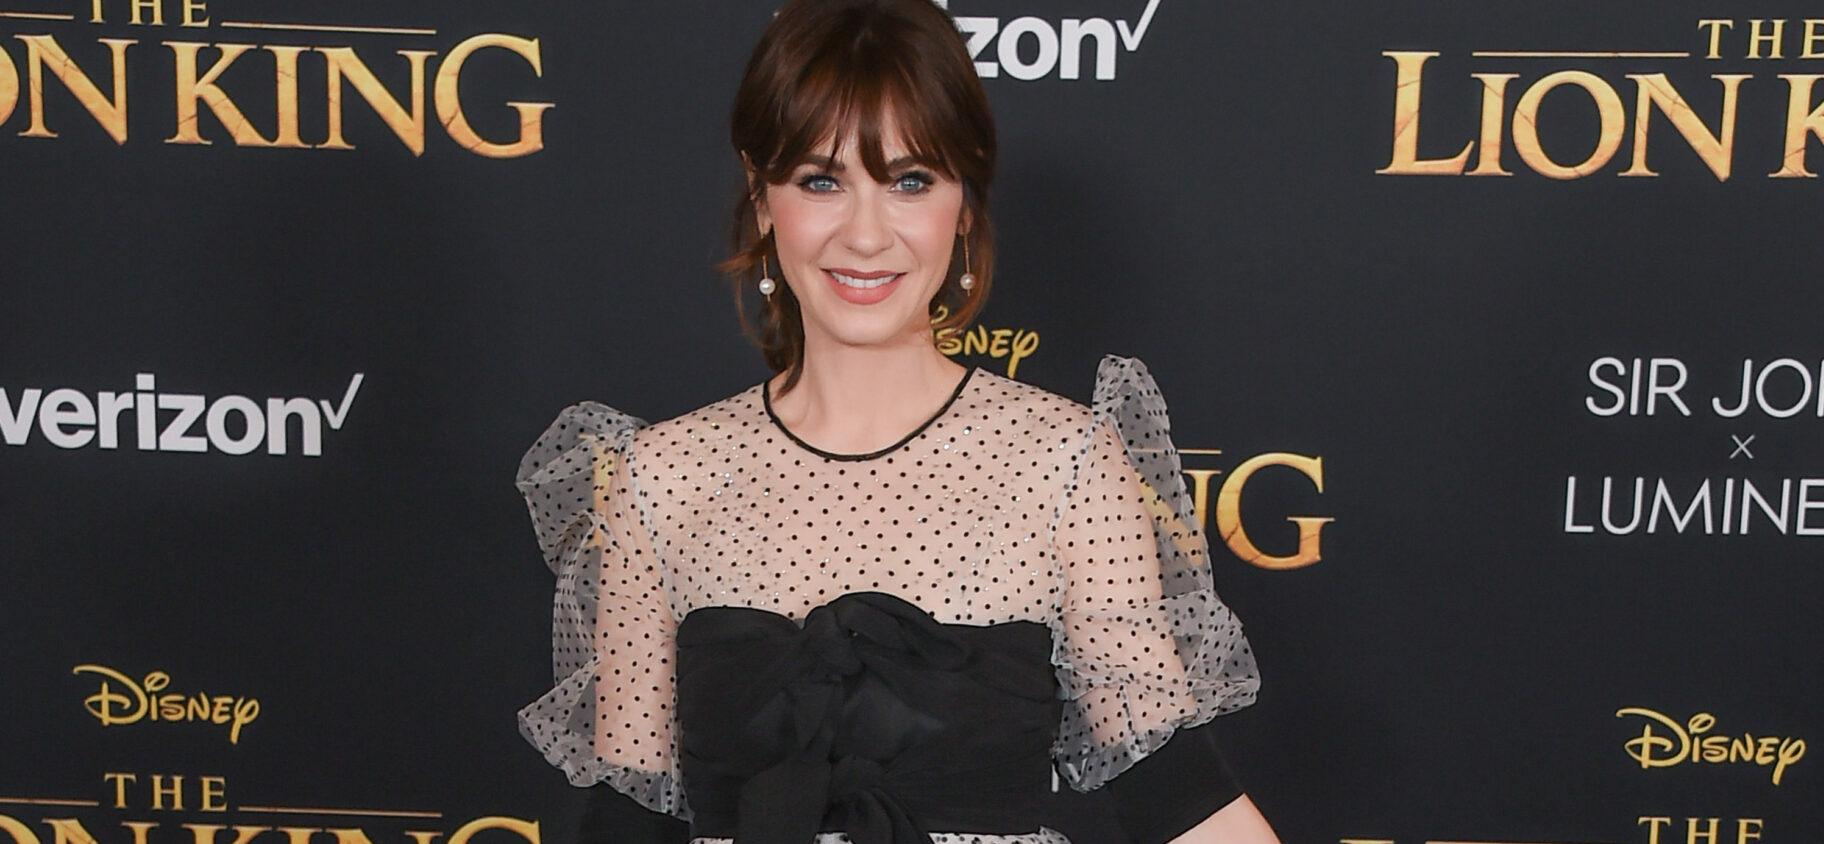 Zooey Deschanel Shares Her Thoughts On A Possible ‘New Girl’ Reboot